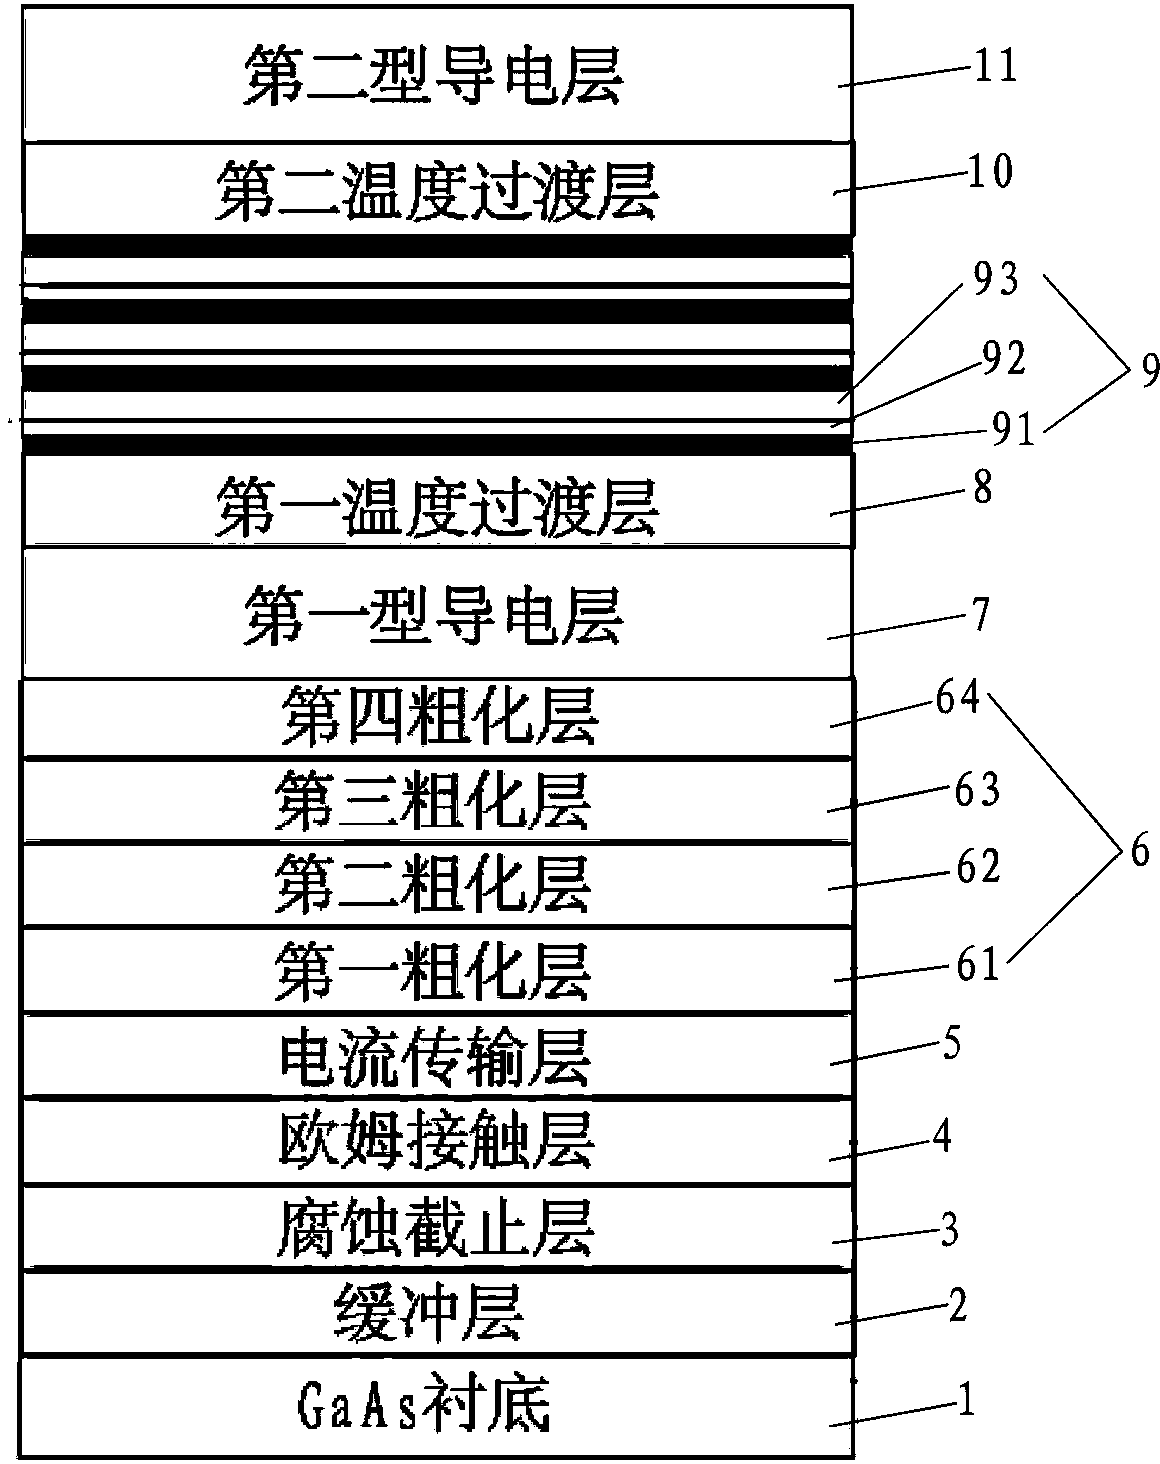 Epitaxial growing method of high-crystal-quality infrared light emitting diode